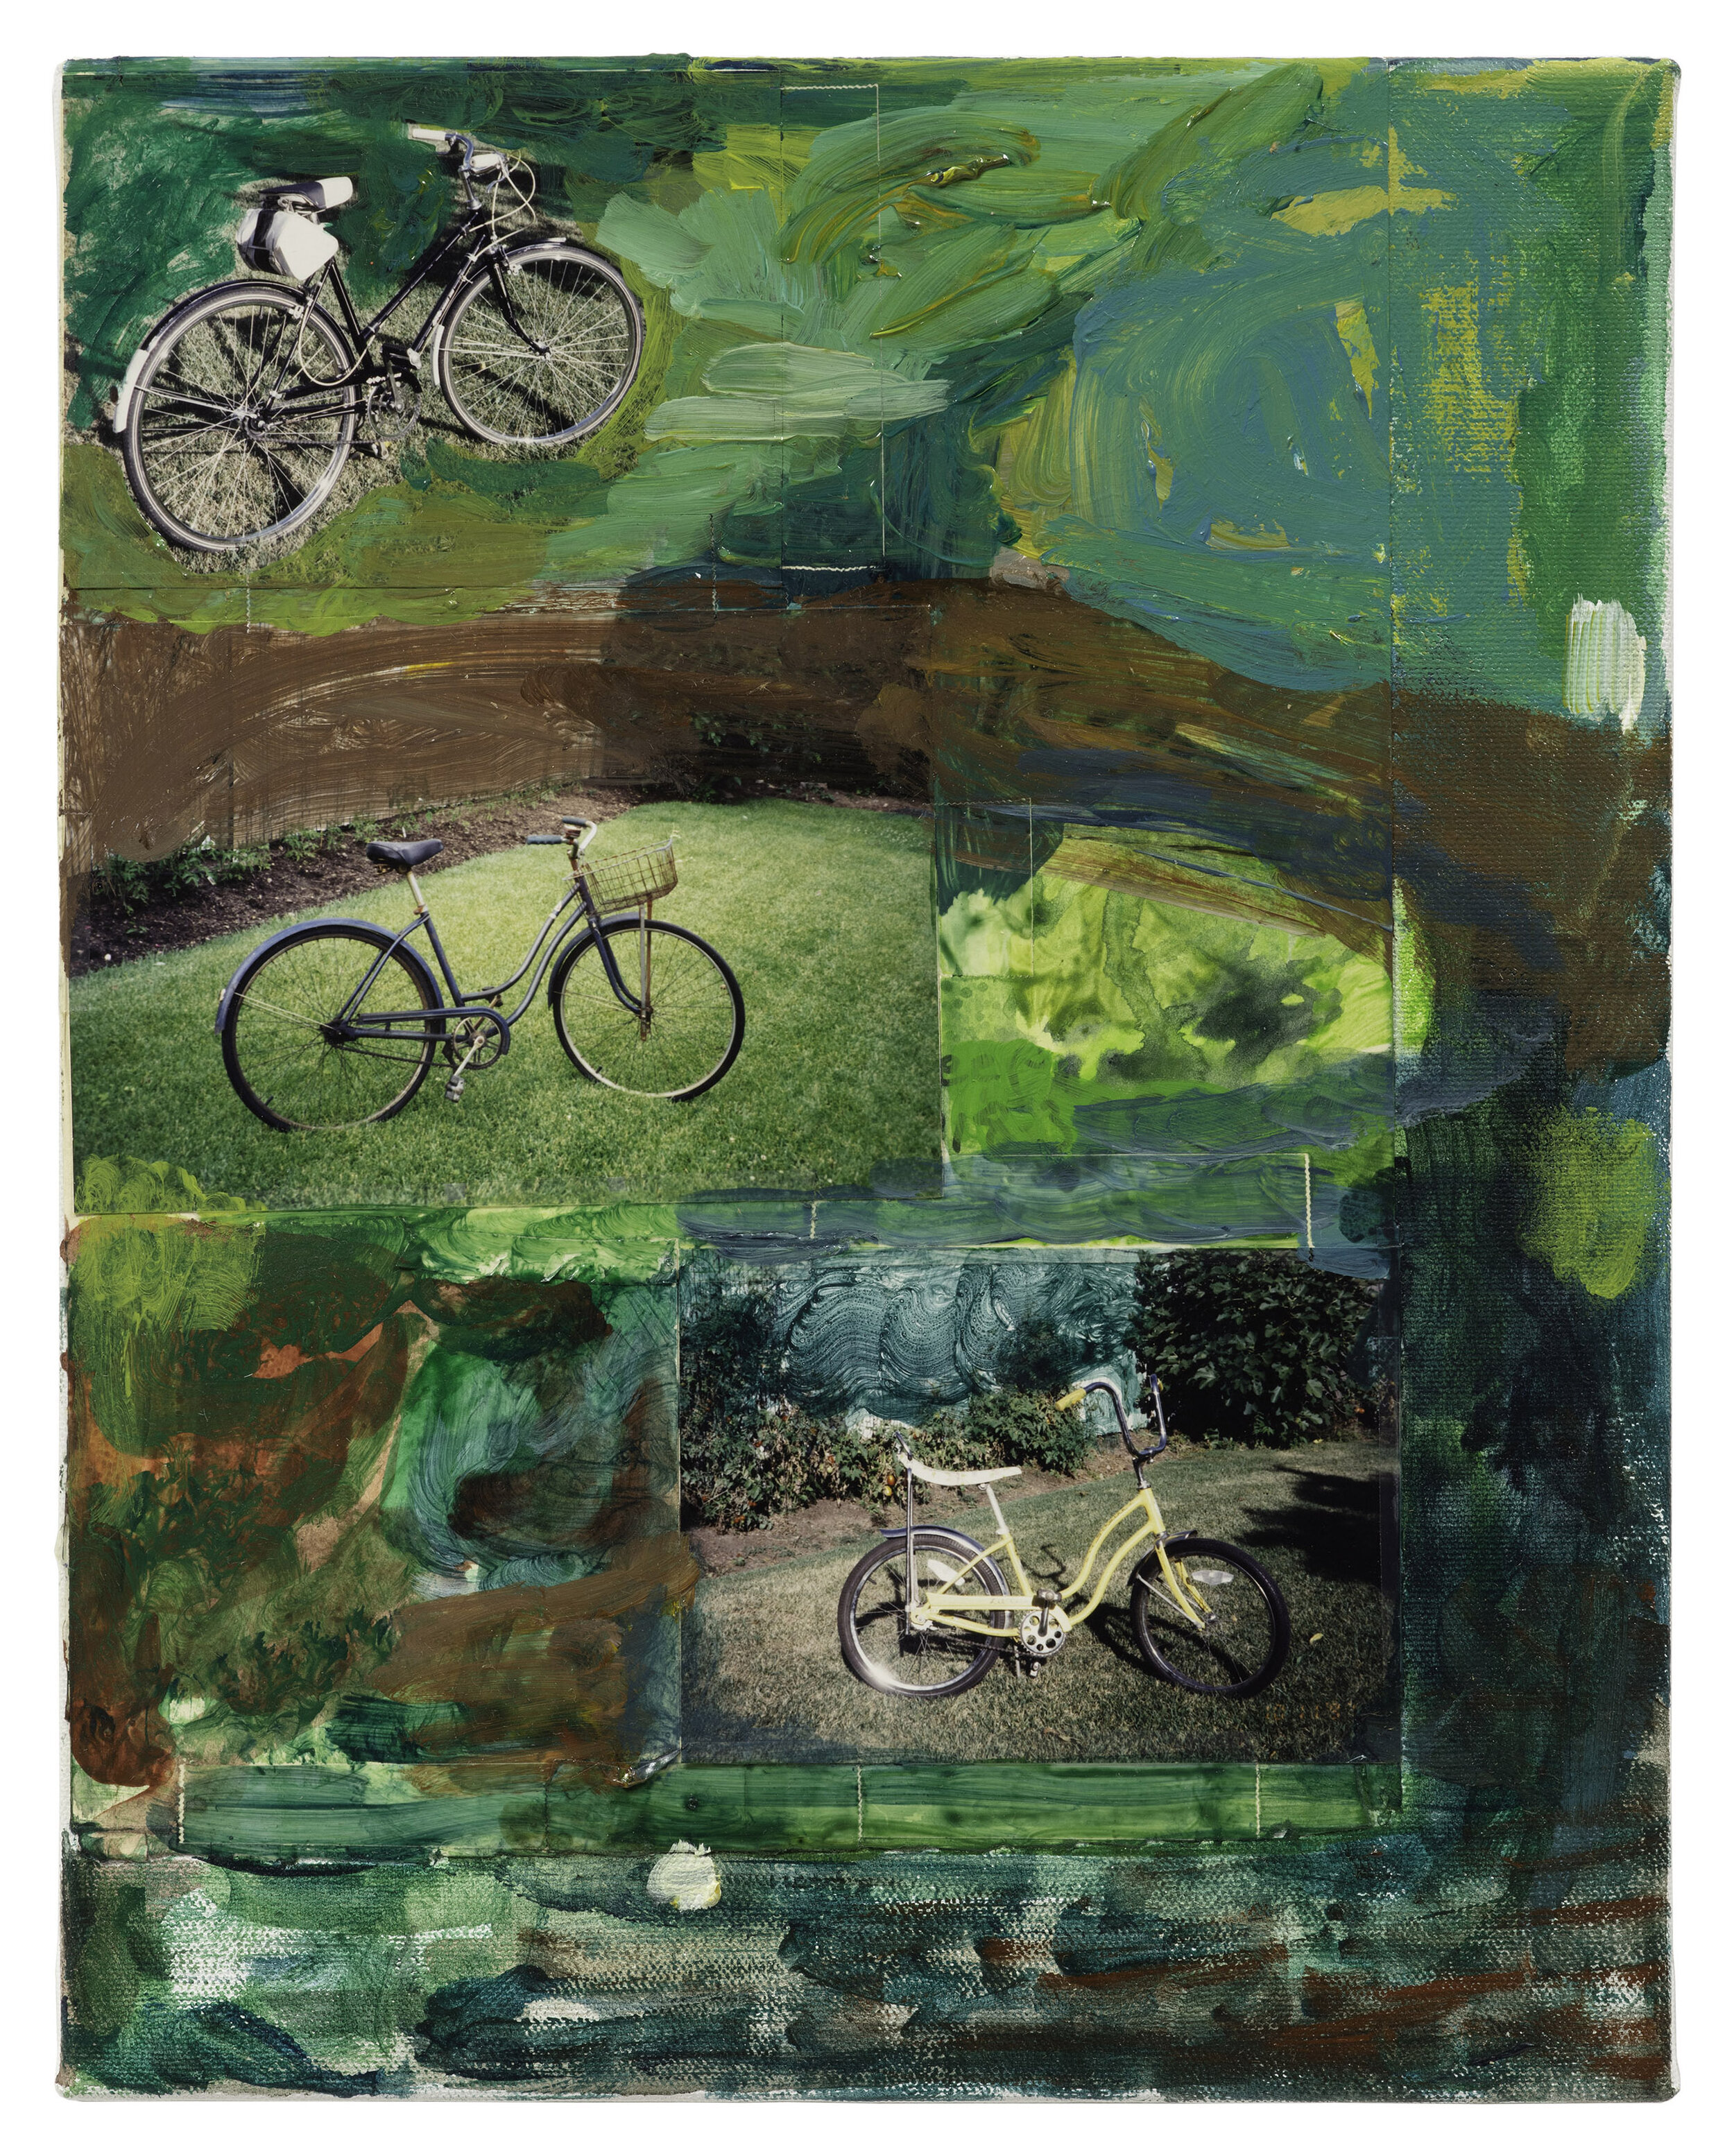  Drew Beattie  Three Bicycles   2005 acrylic and photographs on canvas 14 x 11 inches 